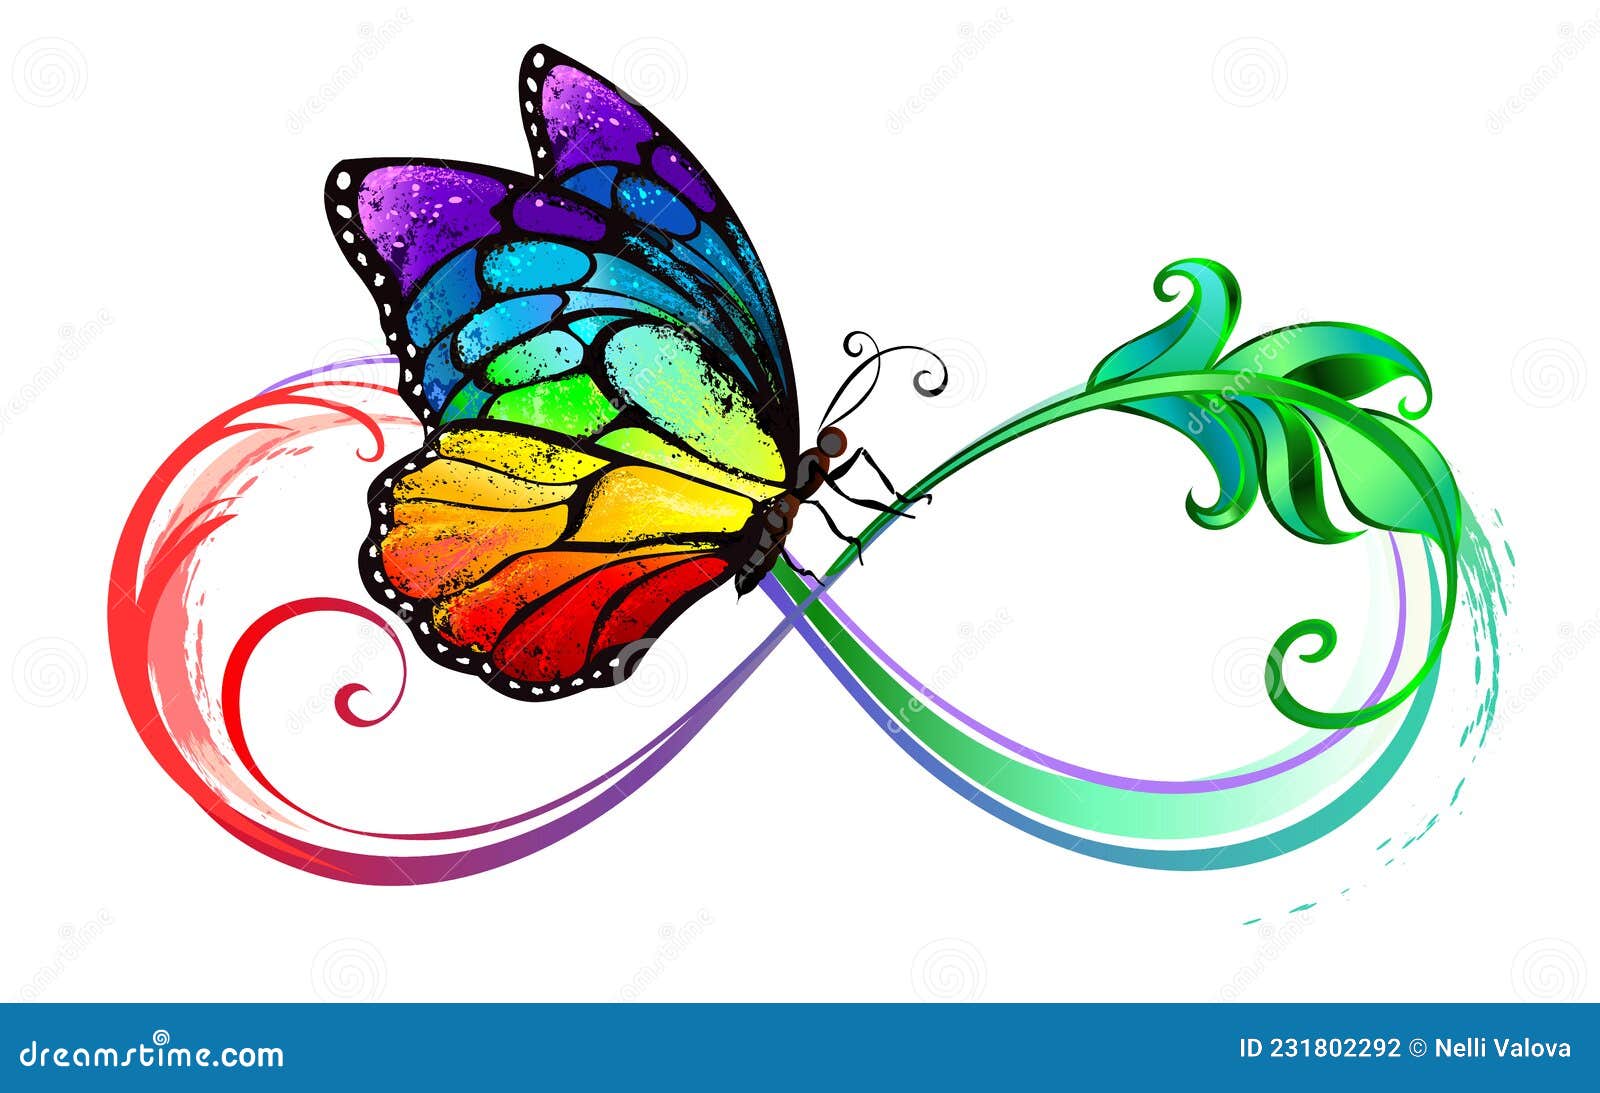 infinity with seated rainbow butterfly